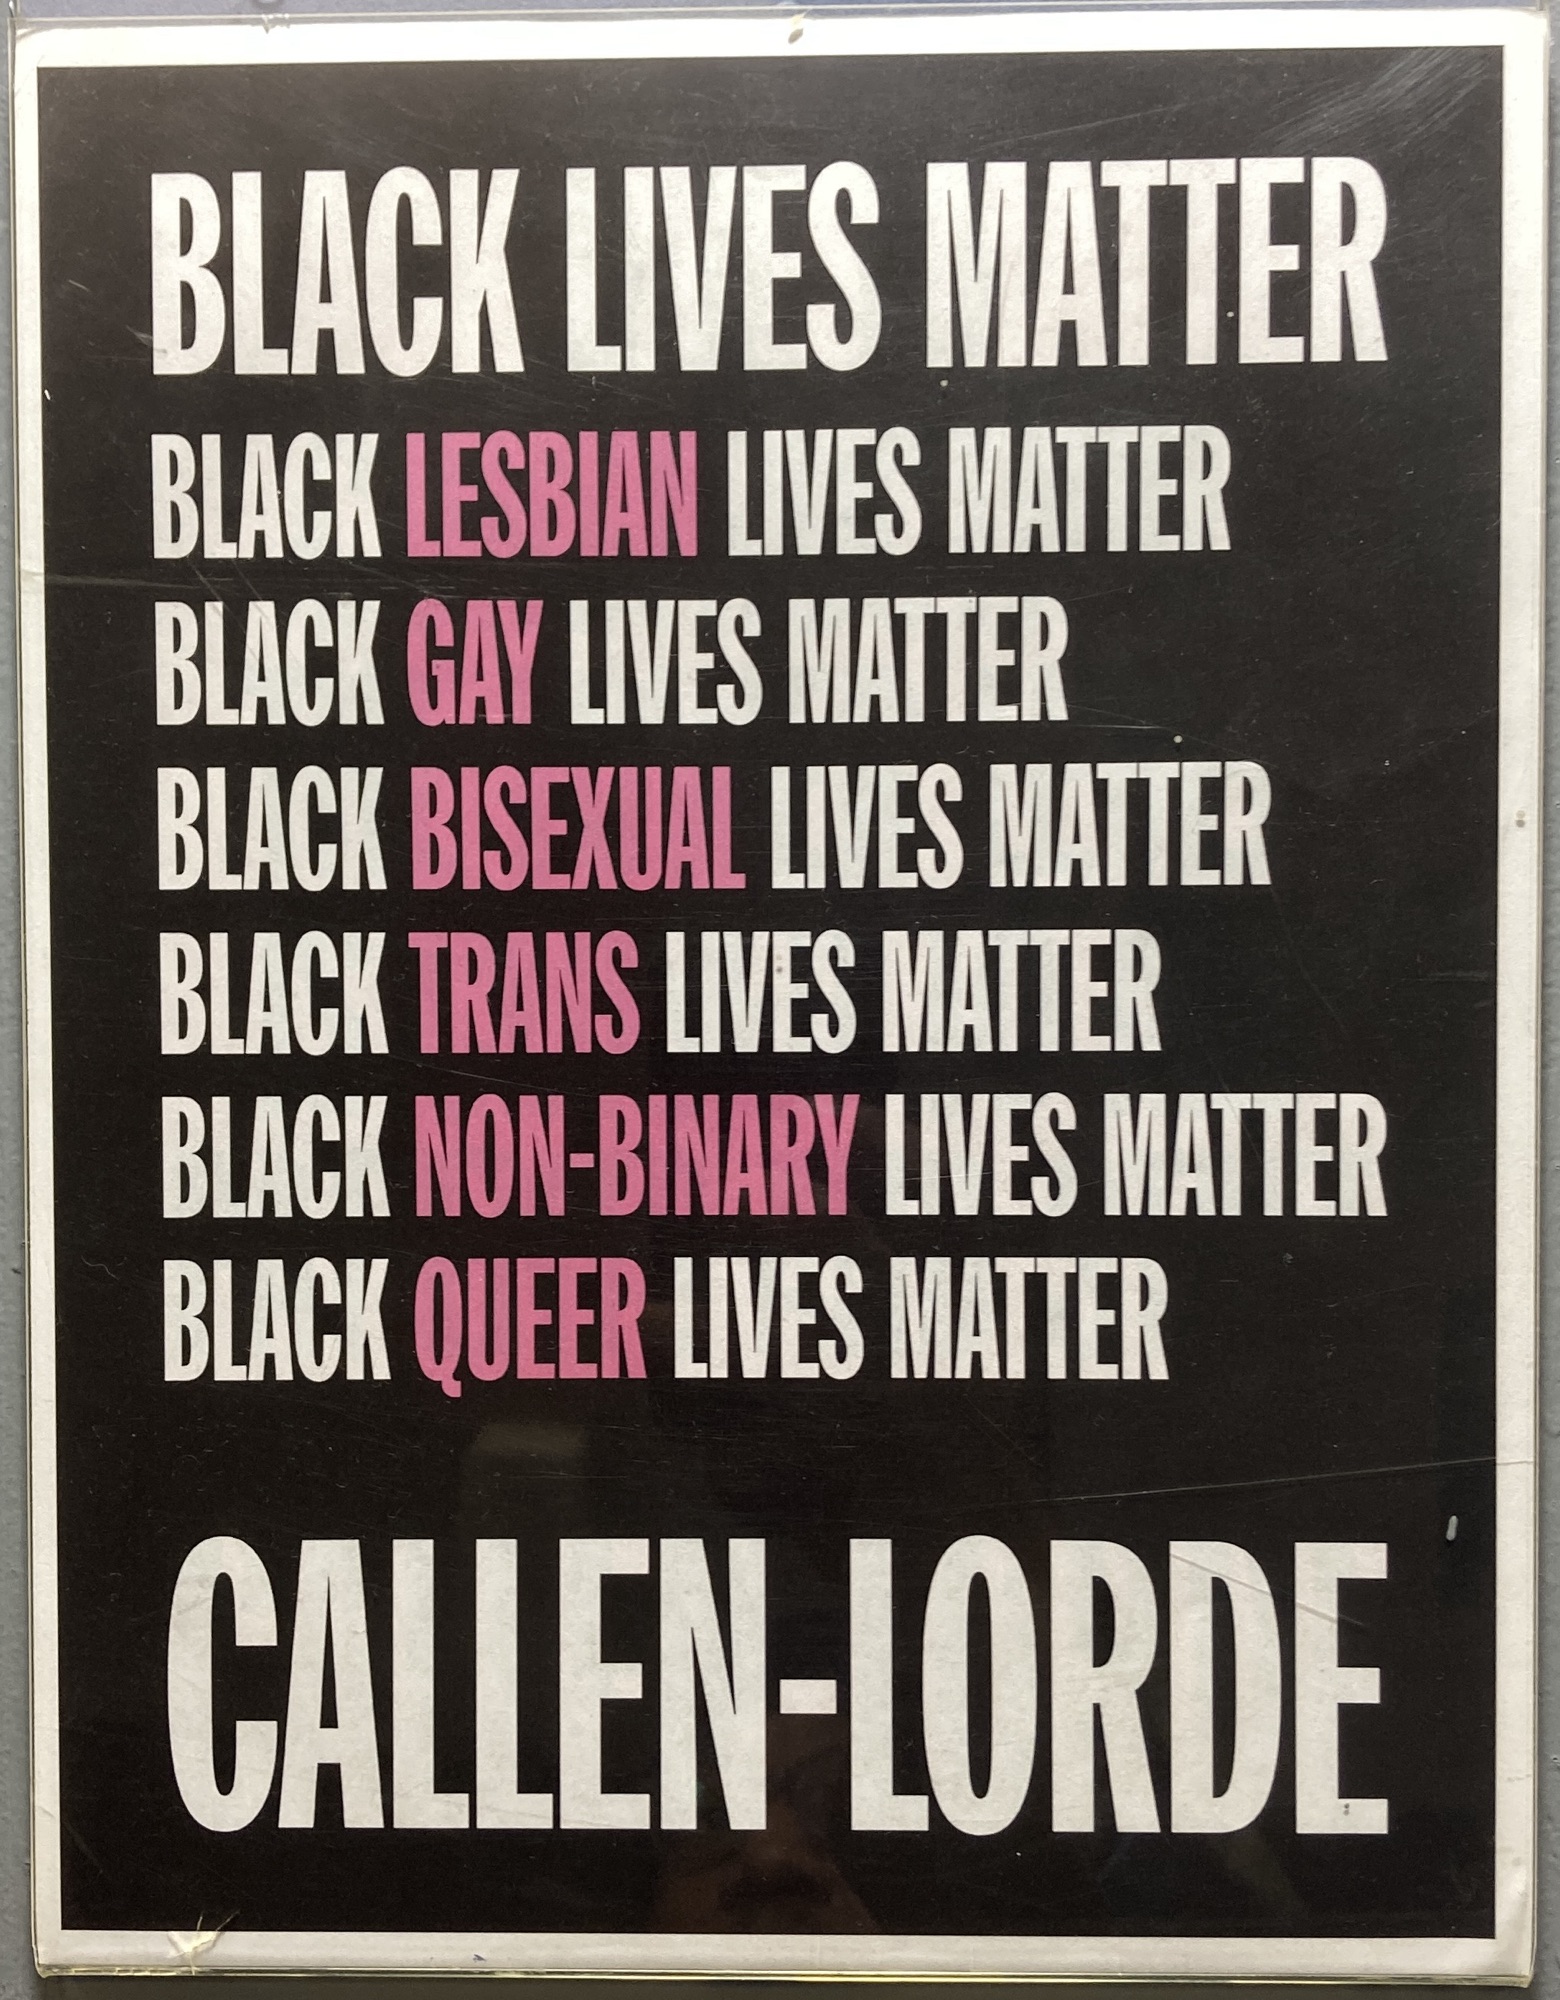 Black Lives Matter poster with Black Lesbian, Gay, Bisexual, Trans, Non-binary and queer lives matter appearing on subsequent lines 